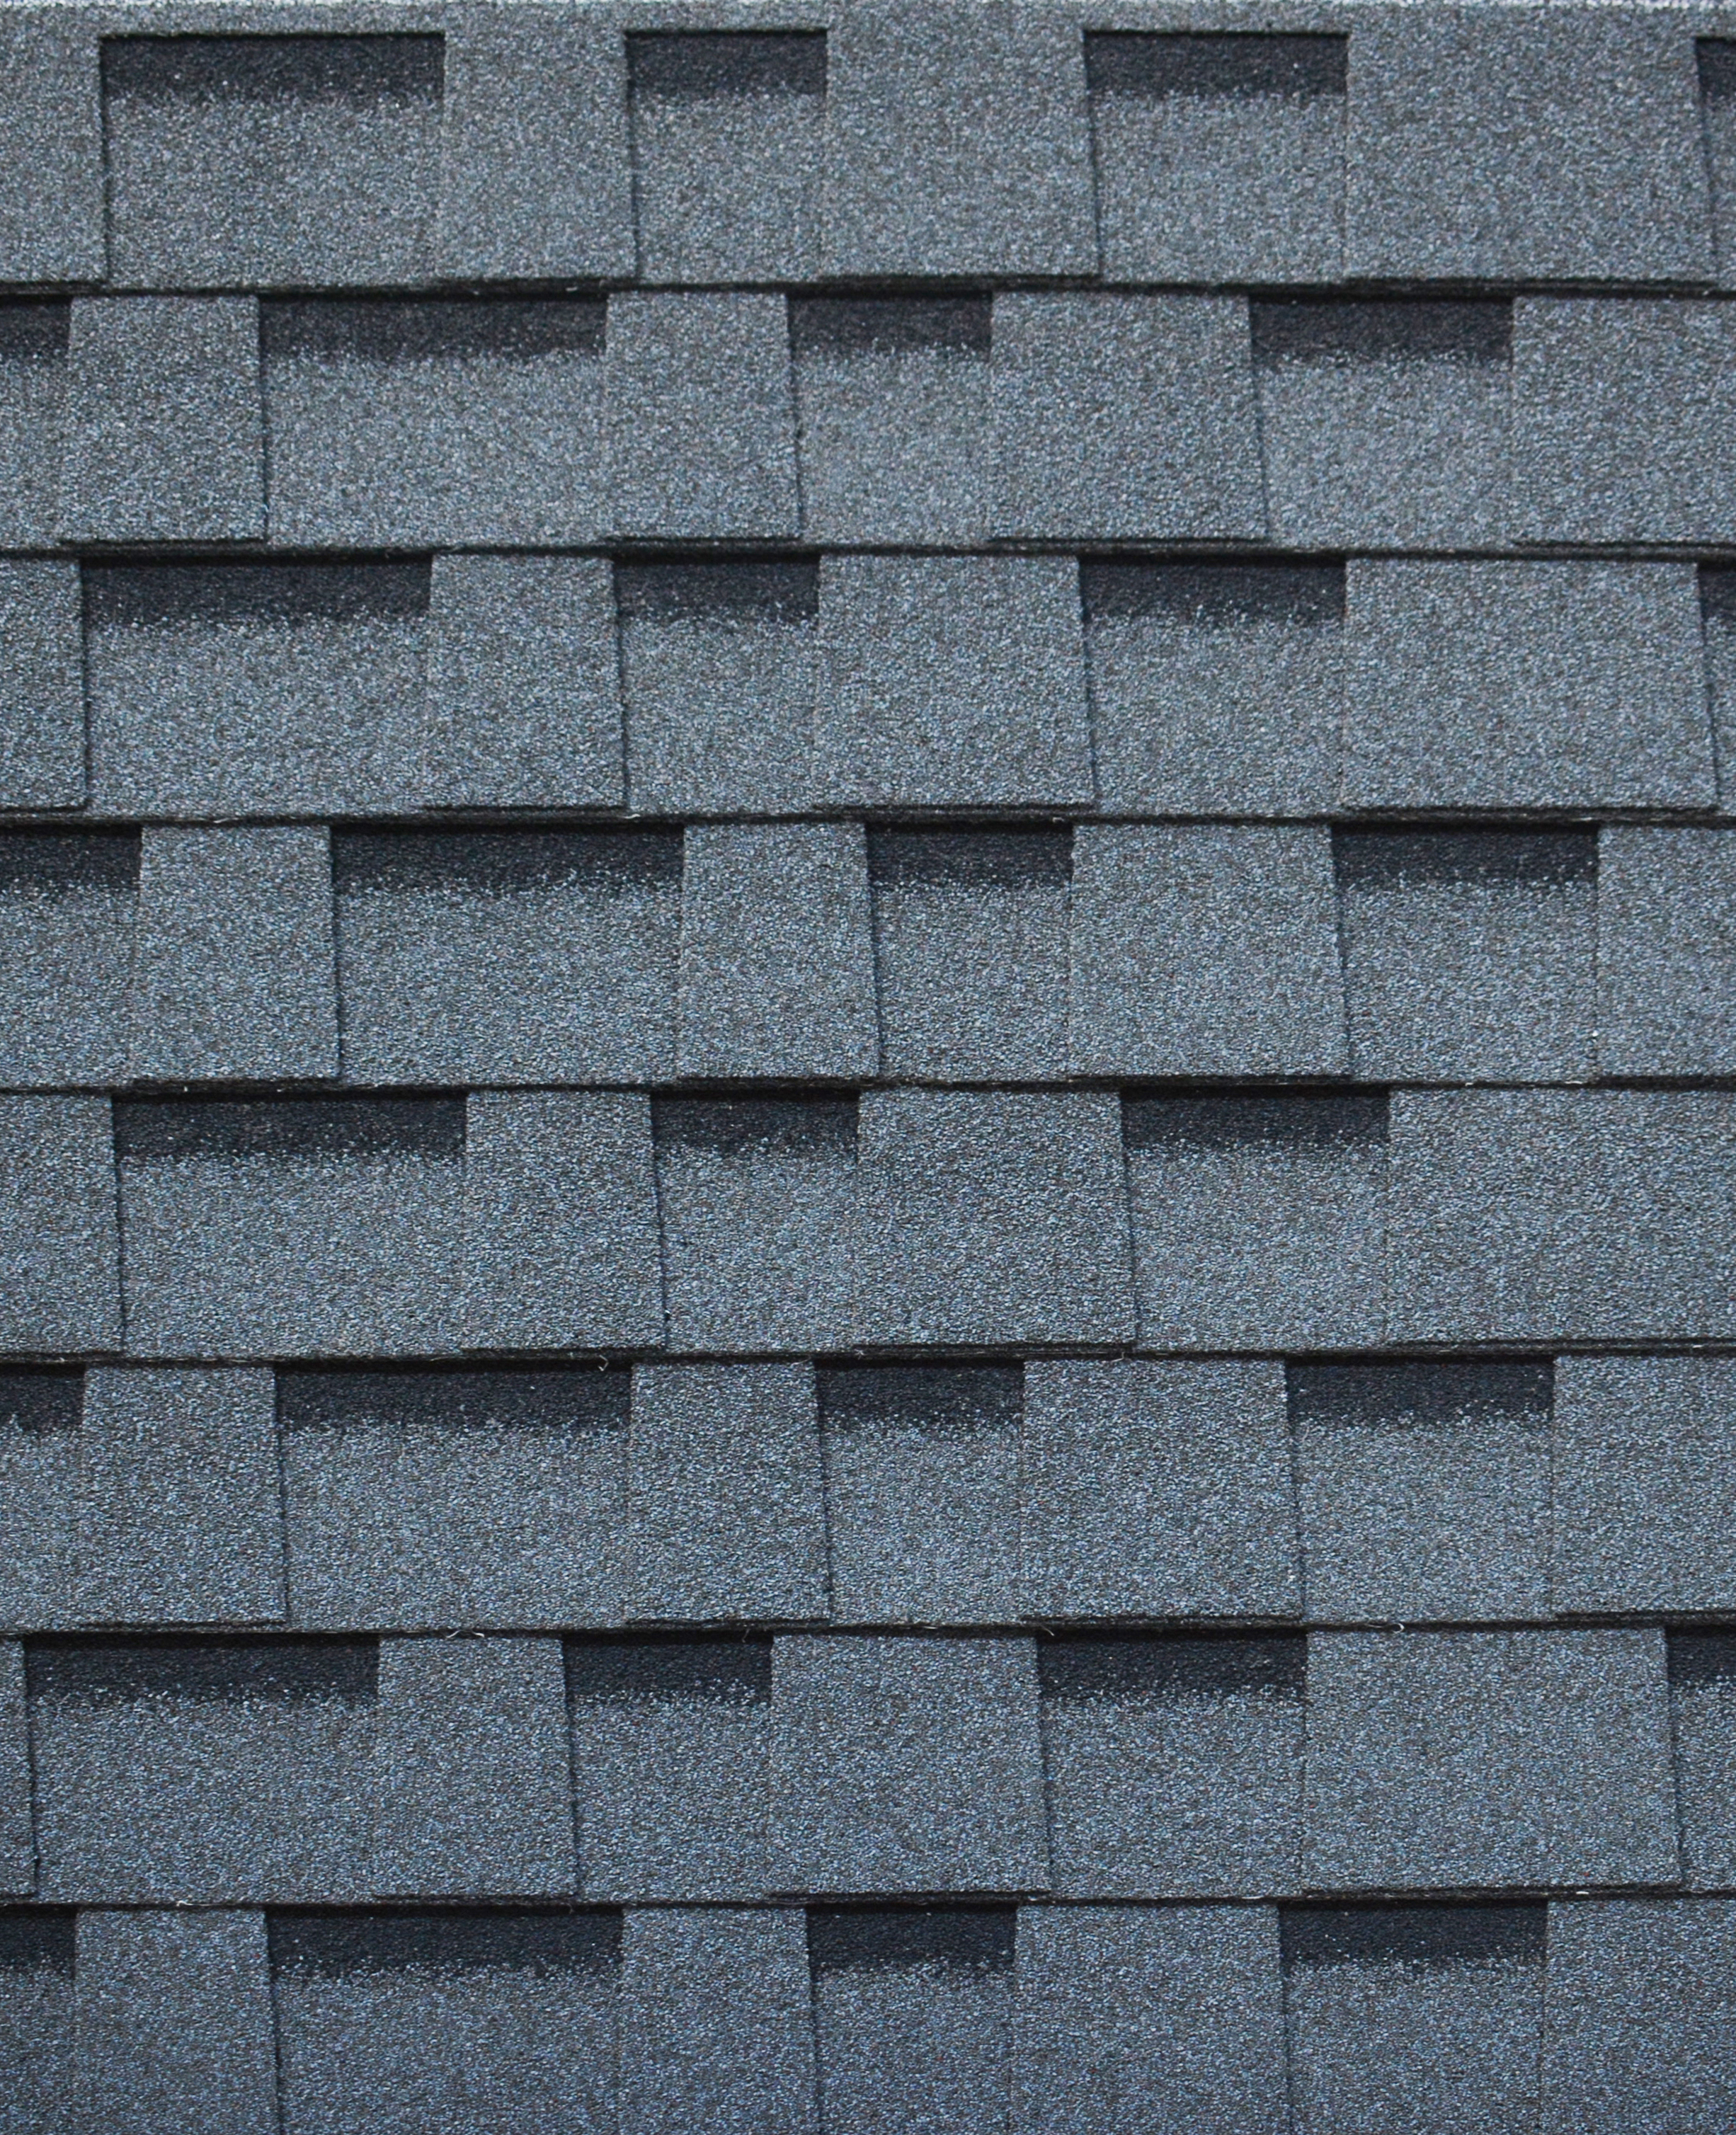 Construction building materials Grey Architectural Roofing Shingles with 30 years warranty Featured Image